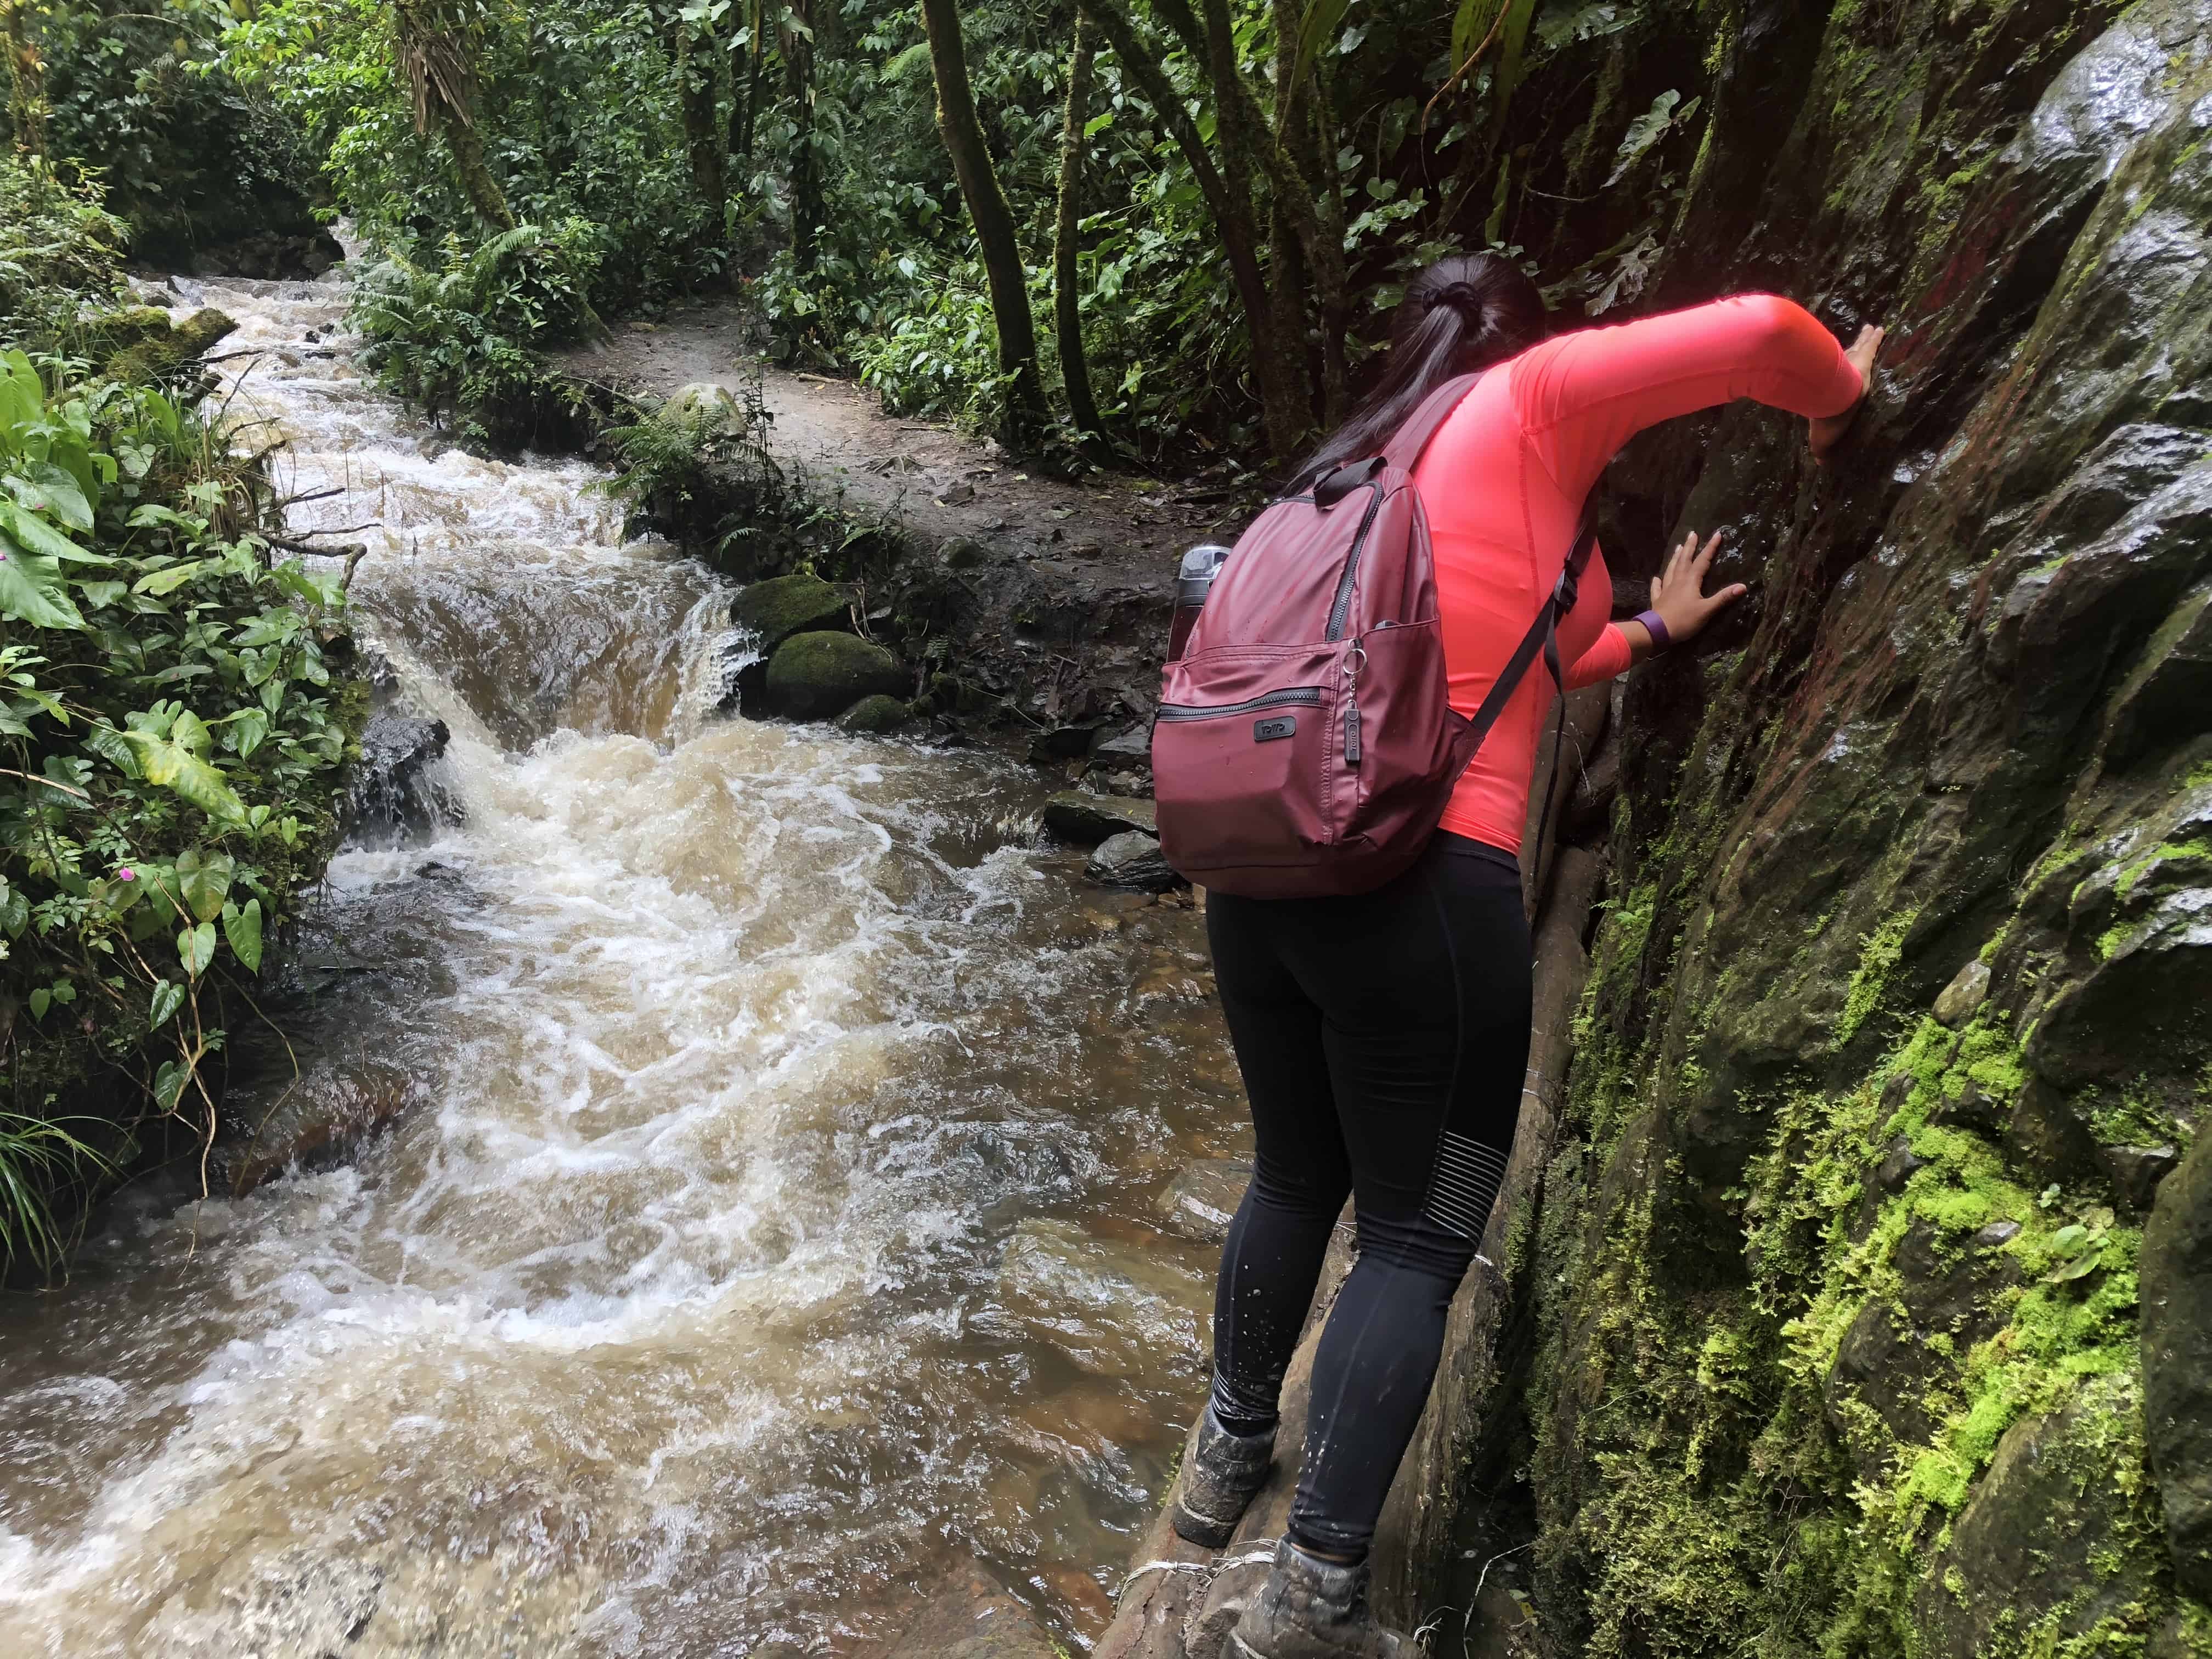 Marisol crossing over some logs at Cocora Valley in Quindío, Colombia